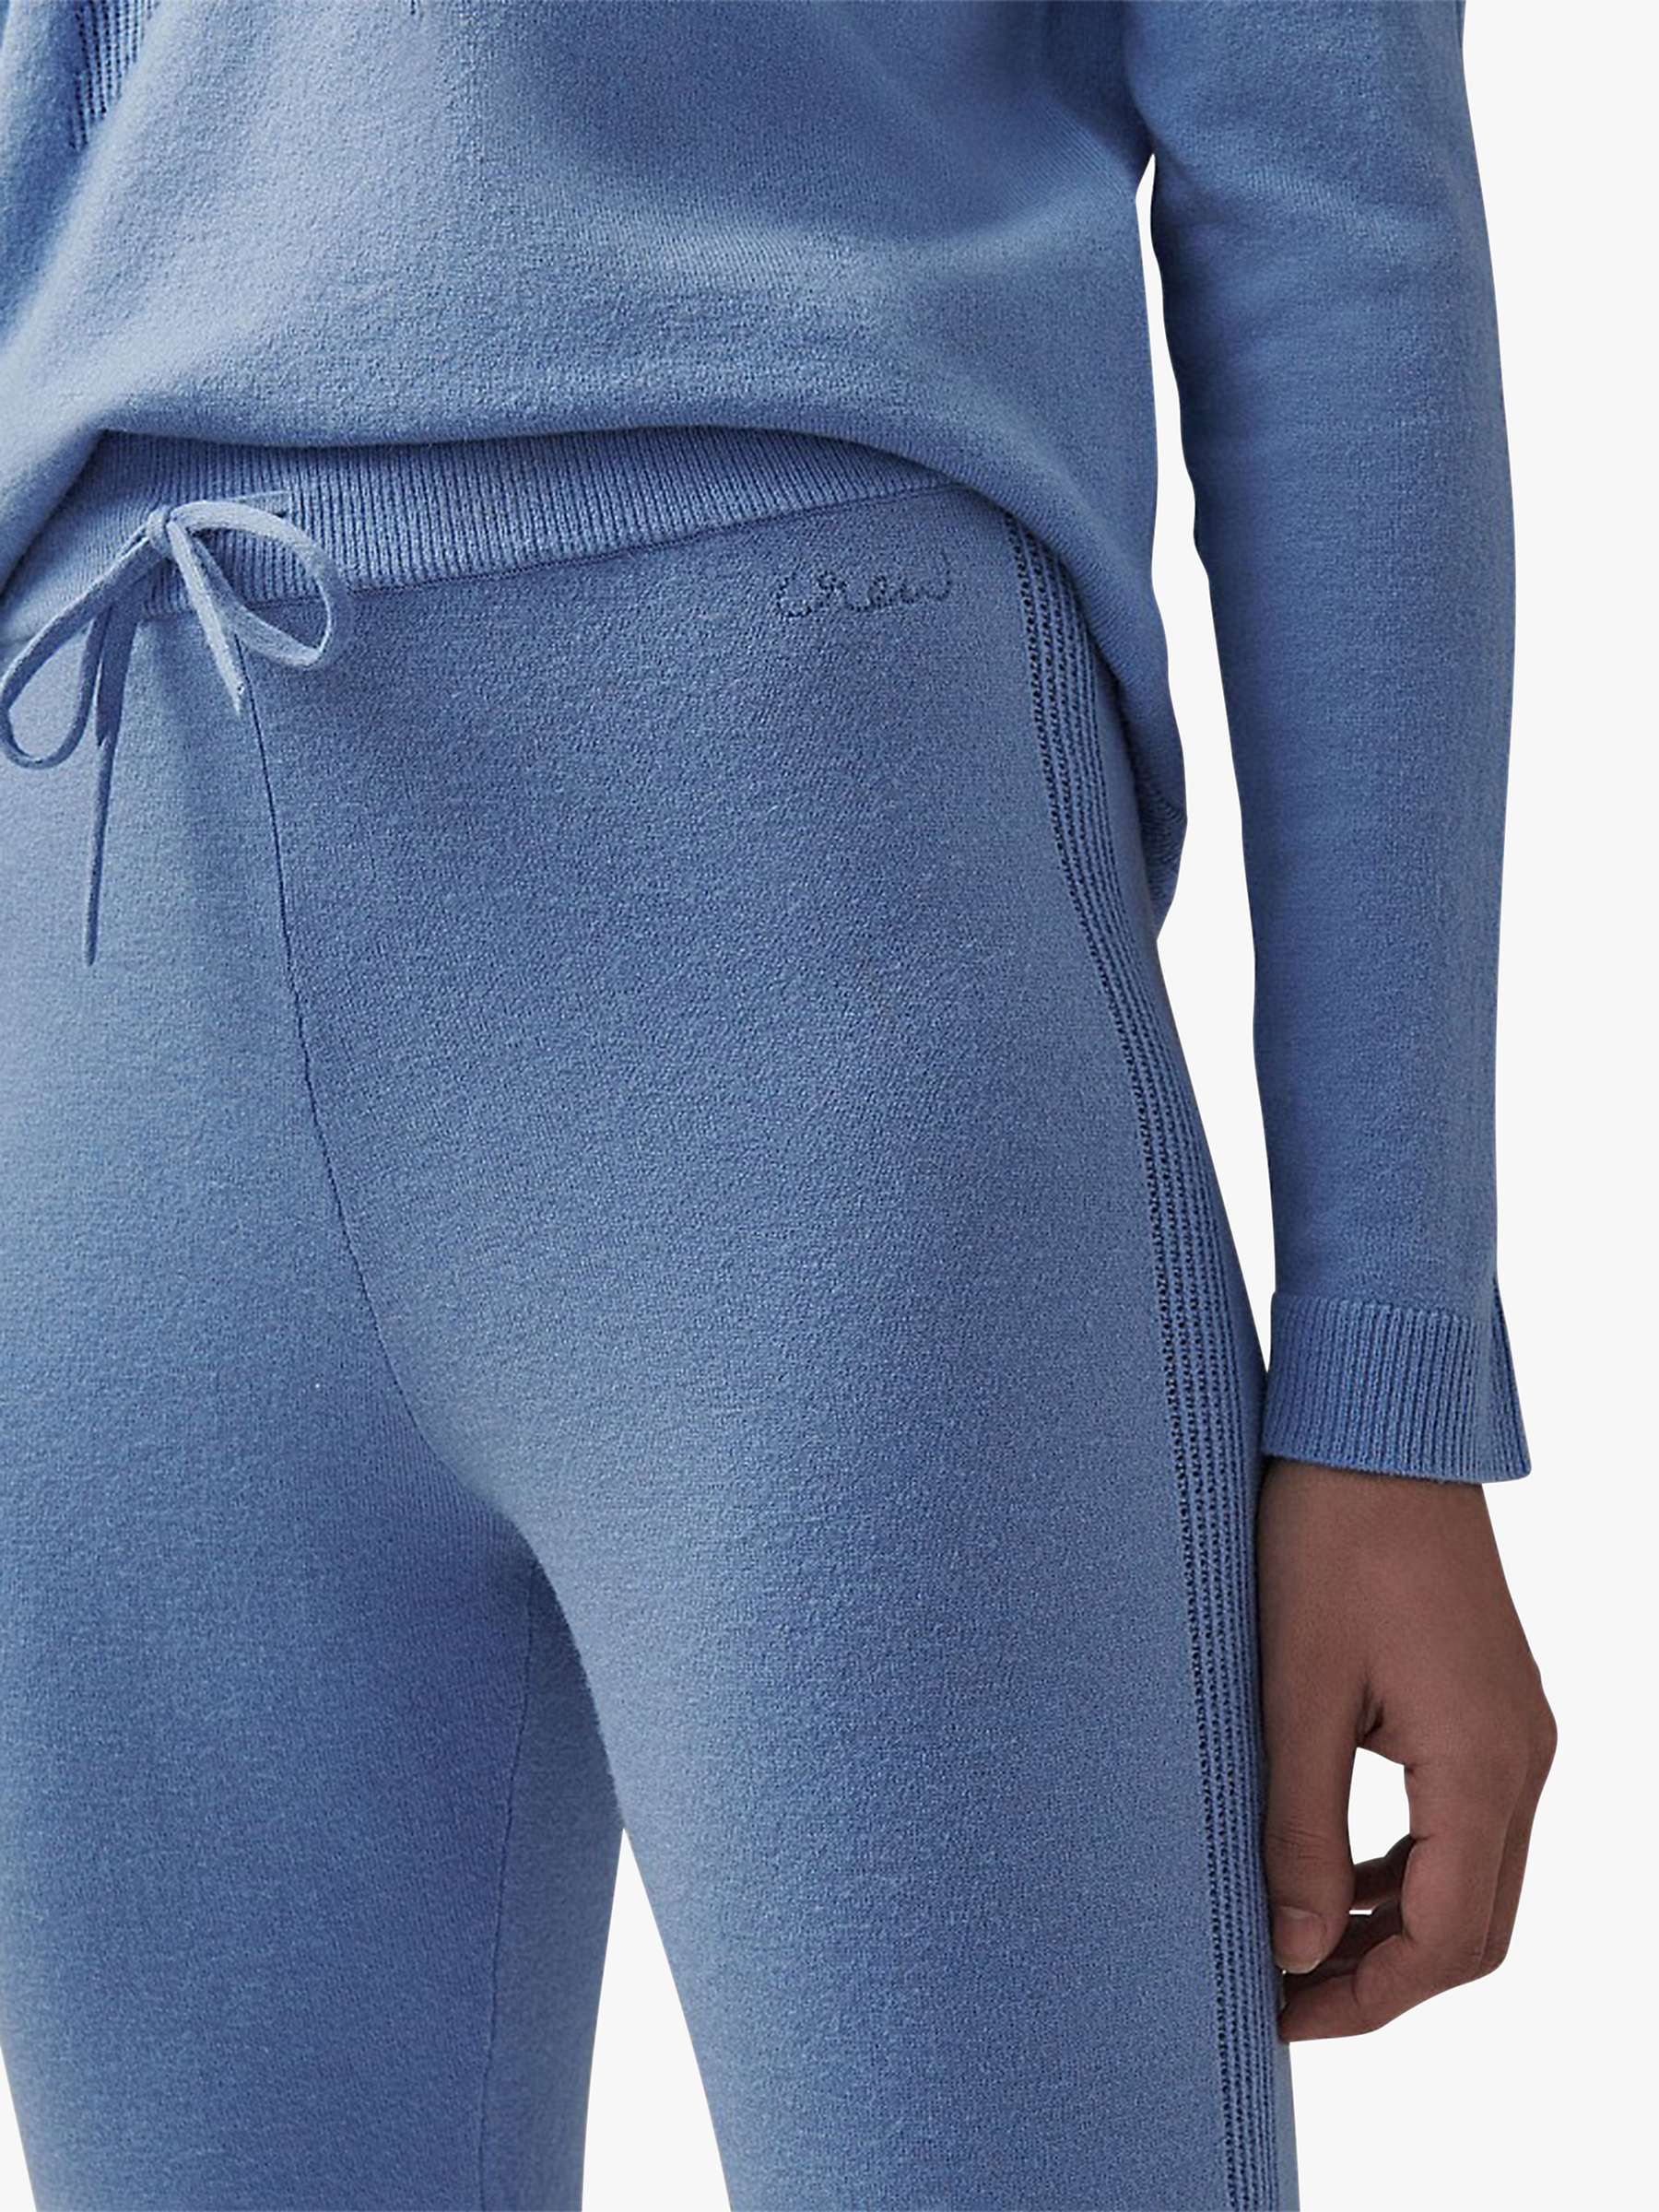 Buy Crew Clothing Knitted Pyjama Bottoms, Light Blue Online at johnlewis.com